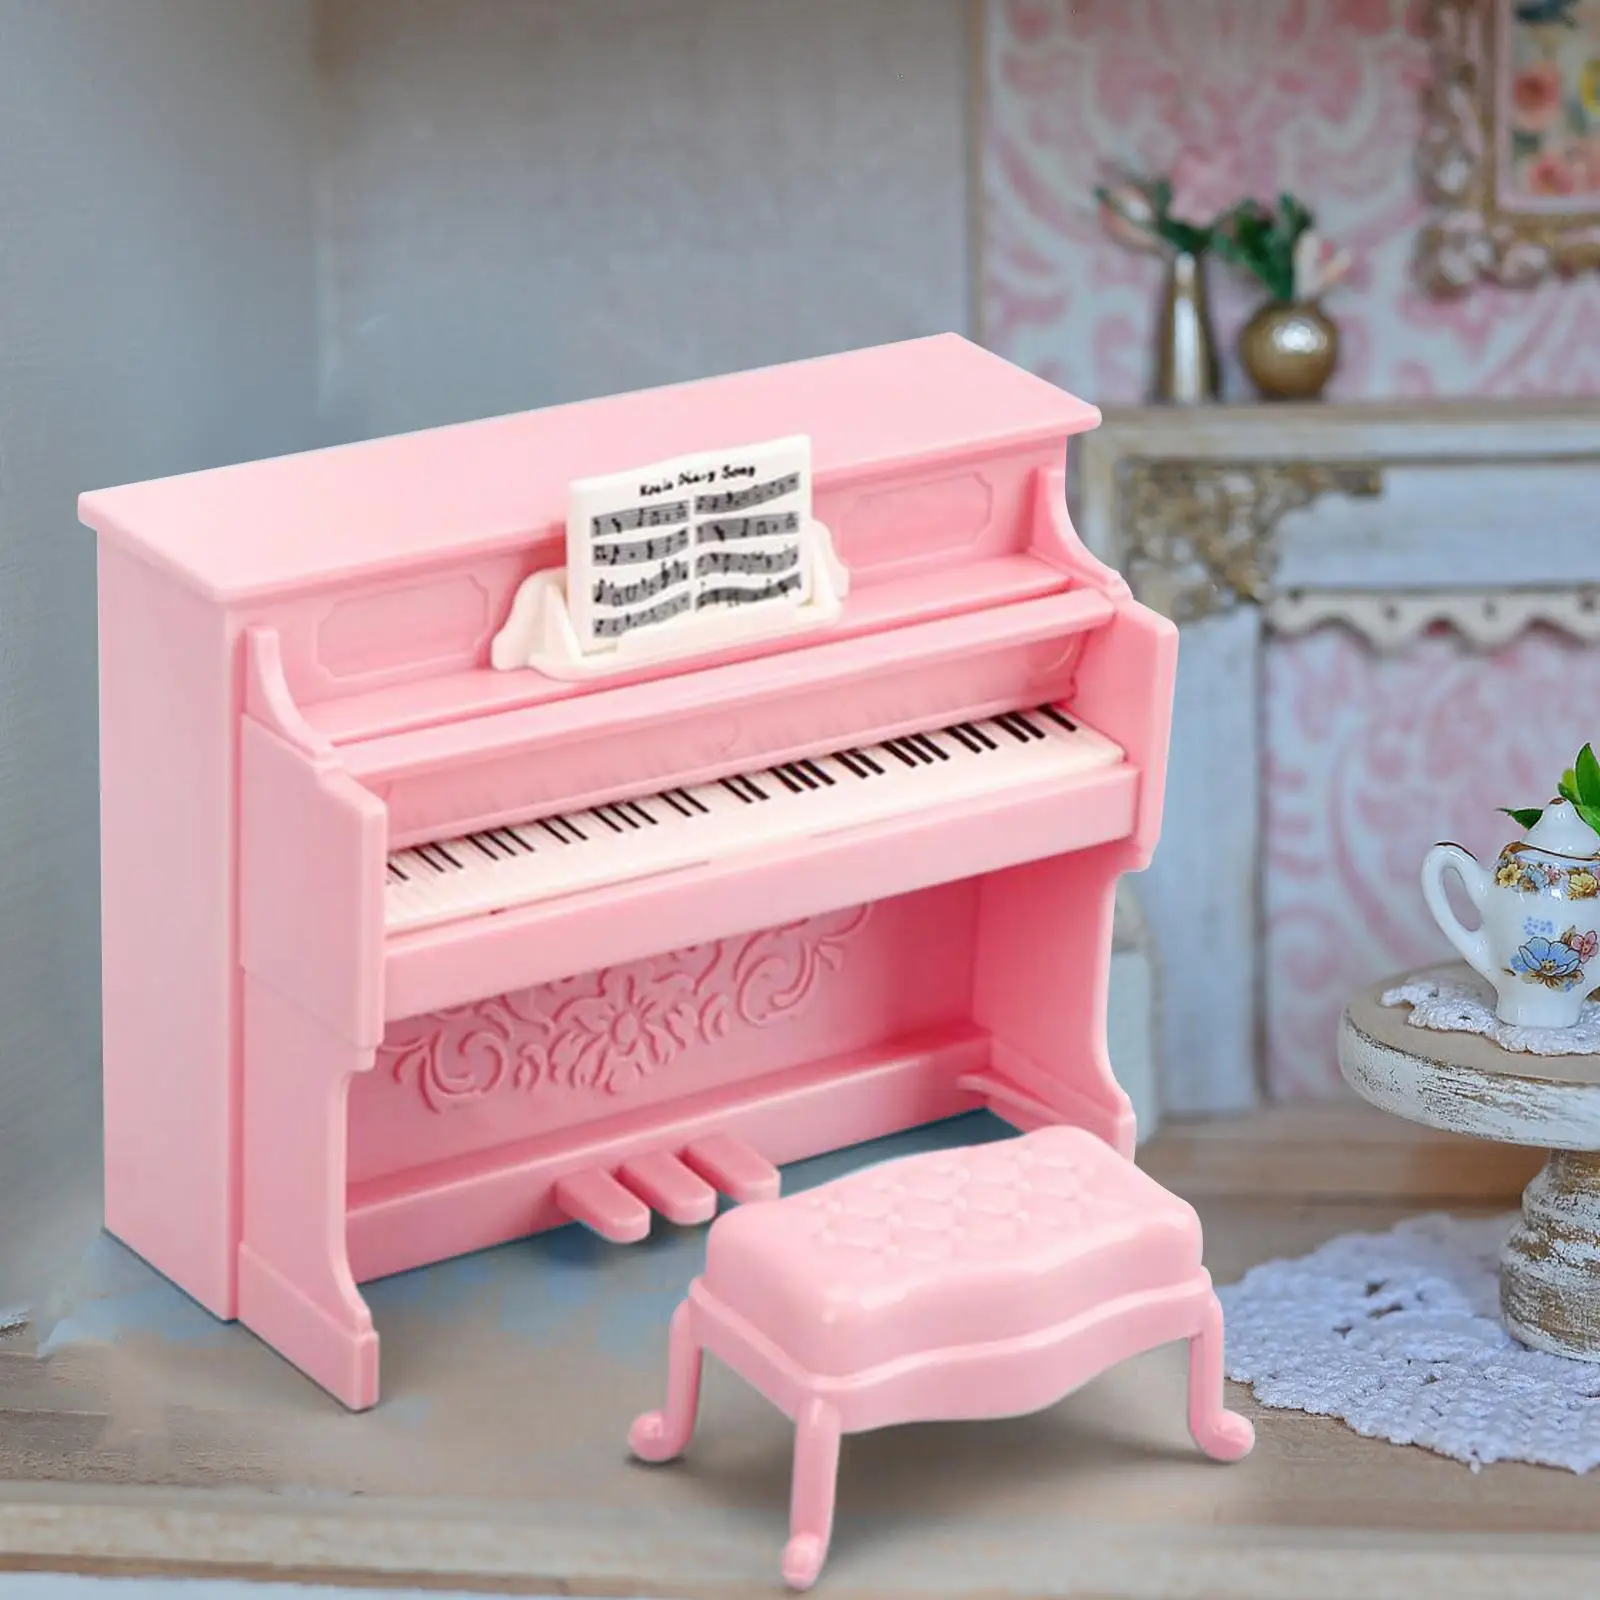 Miniature Piano with Stool Accessory for Props Window Display Handcraft